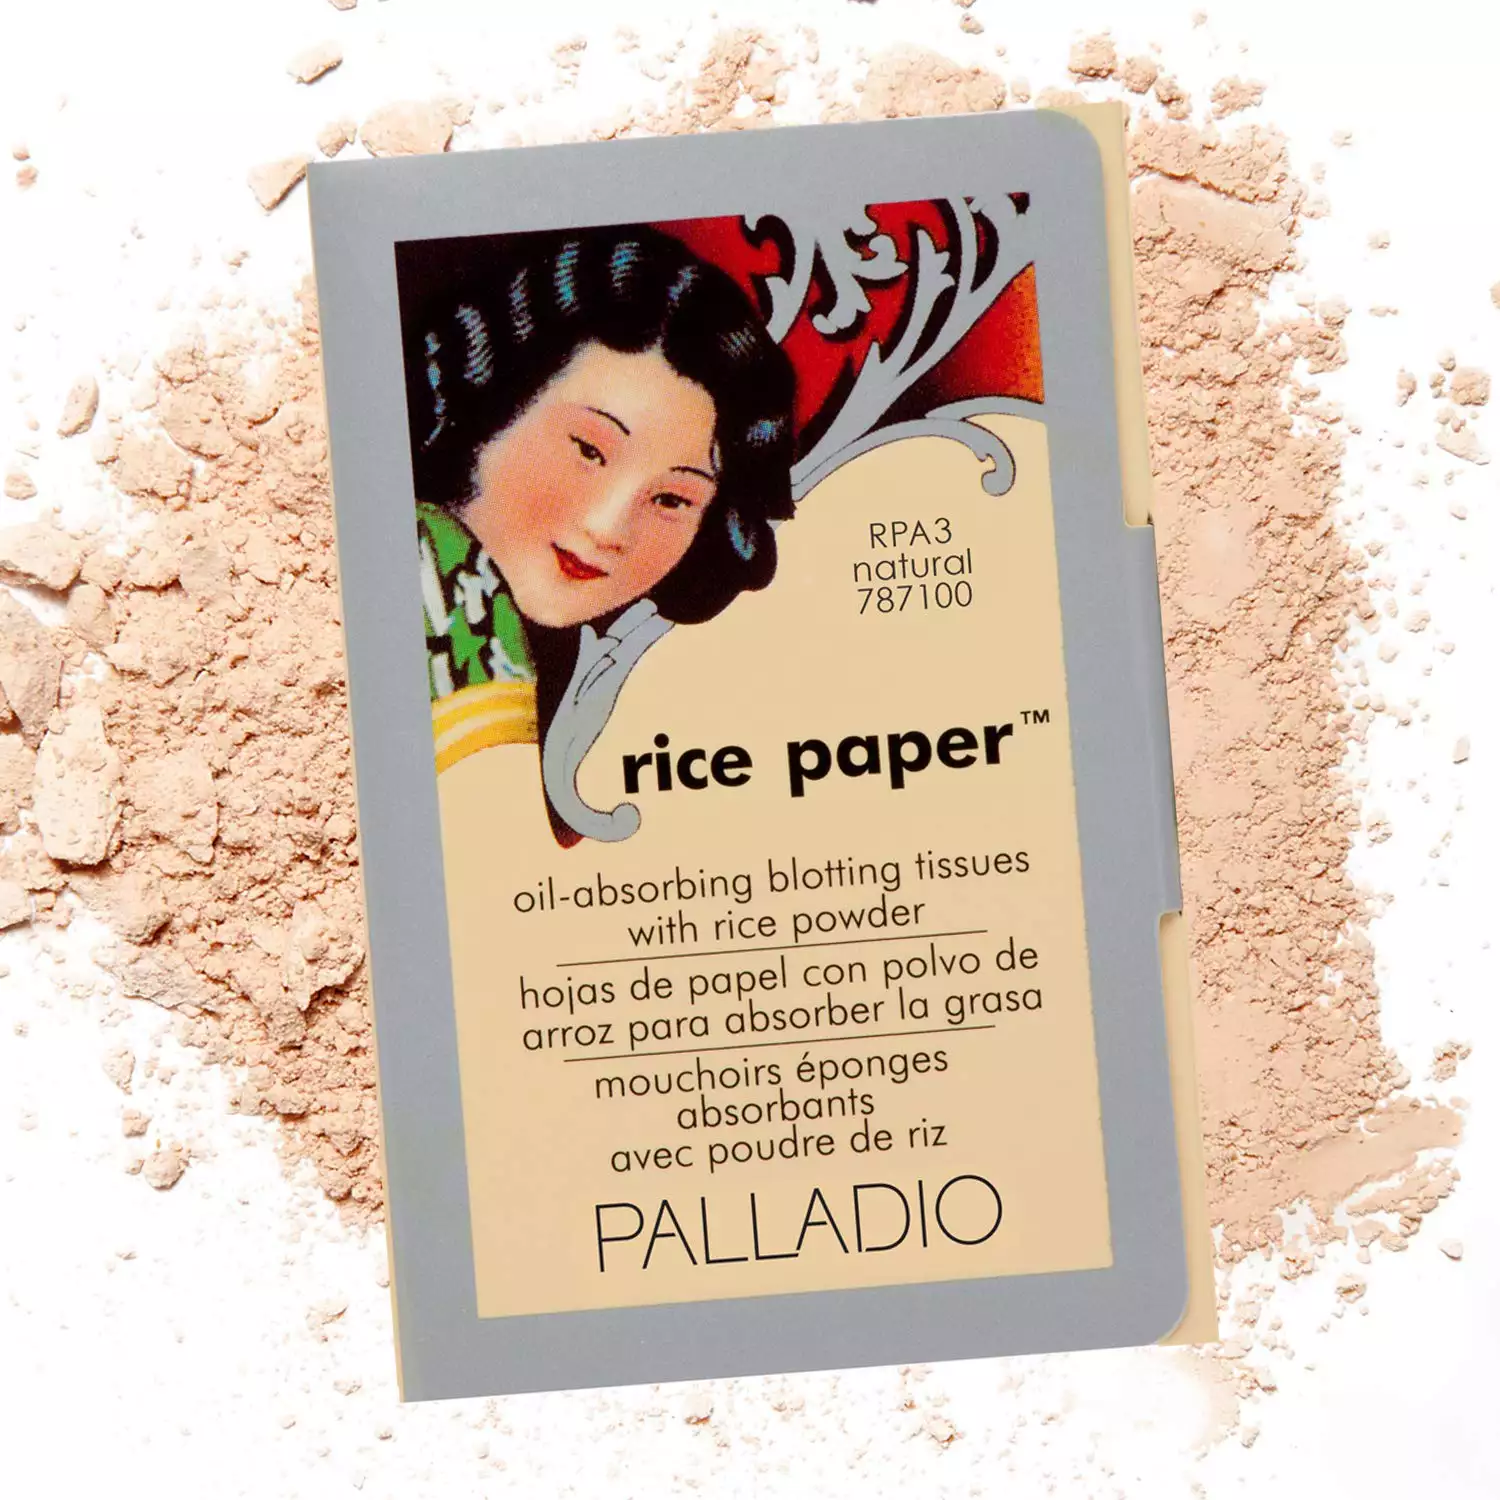 Palladio Rice Paper Facial Tissues for Oily Skin